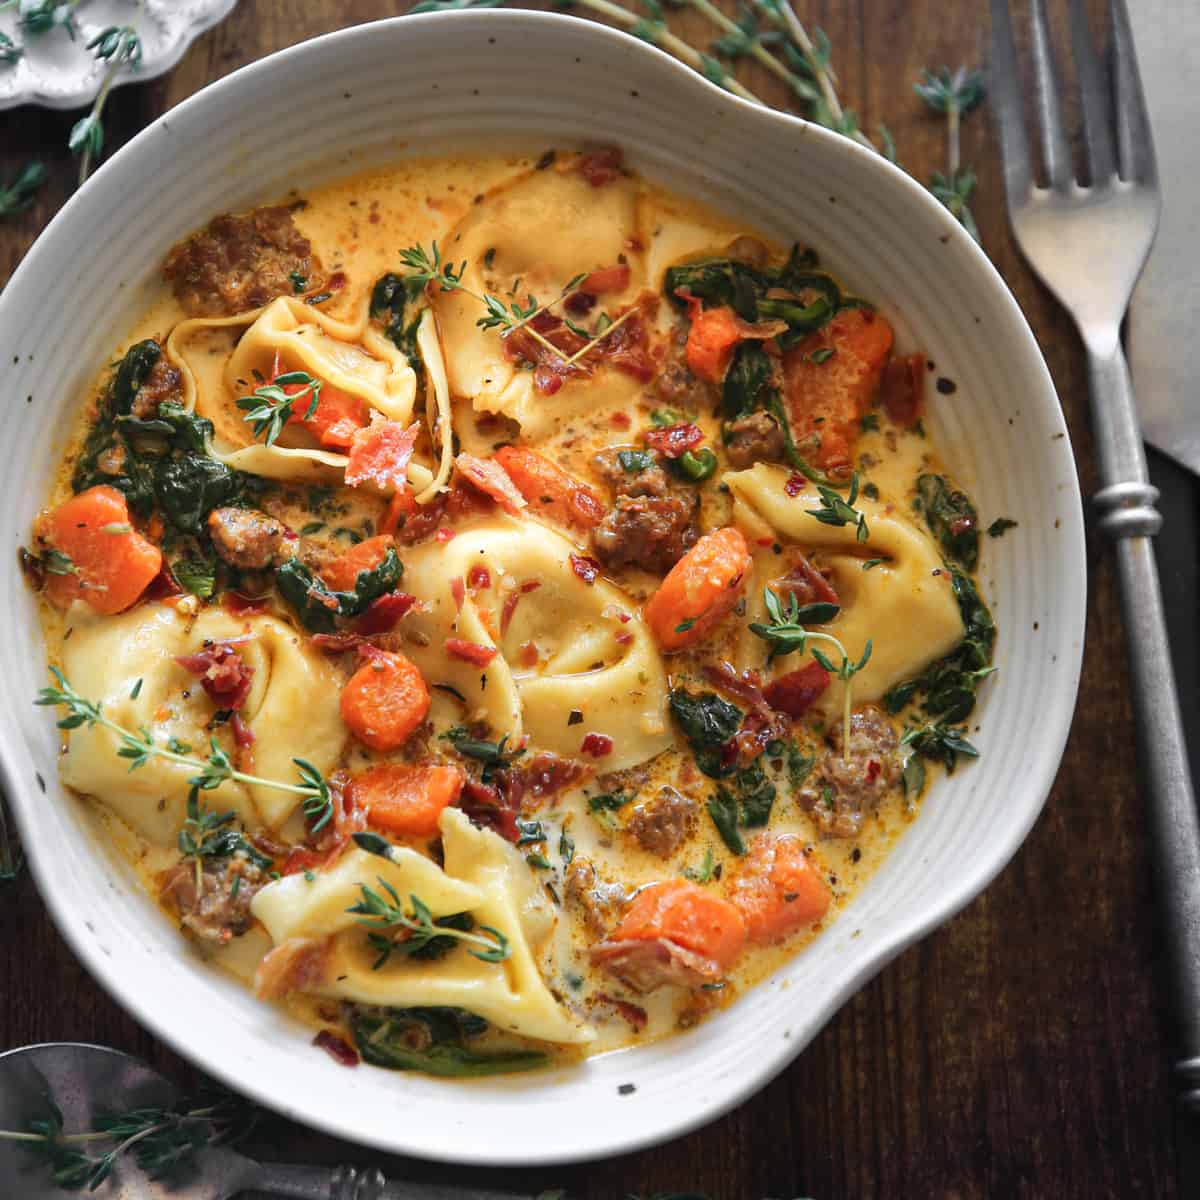 Creamy Italian Sausage Tortellini Soup with Spinach, Carrots, and Bacon Bits - in a white bowl.